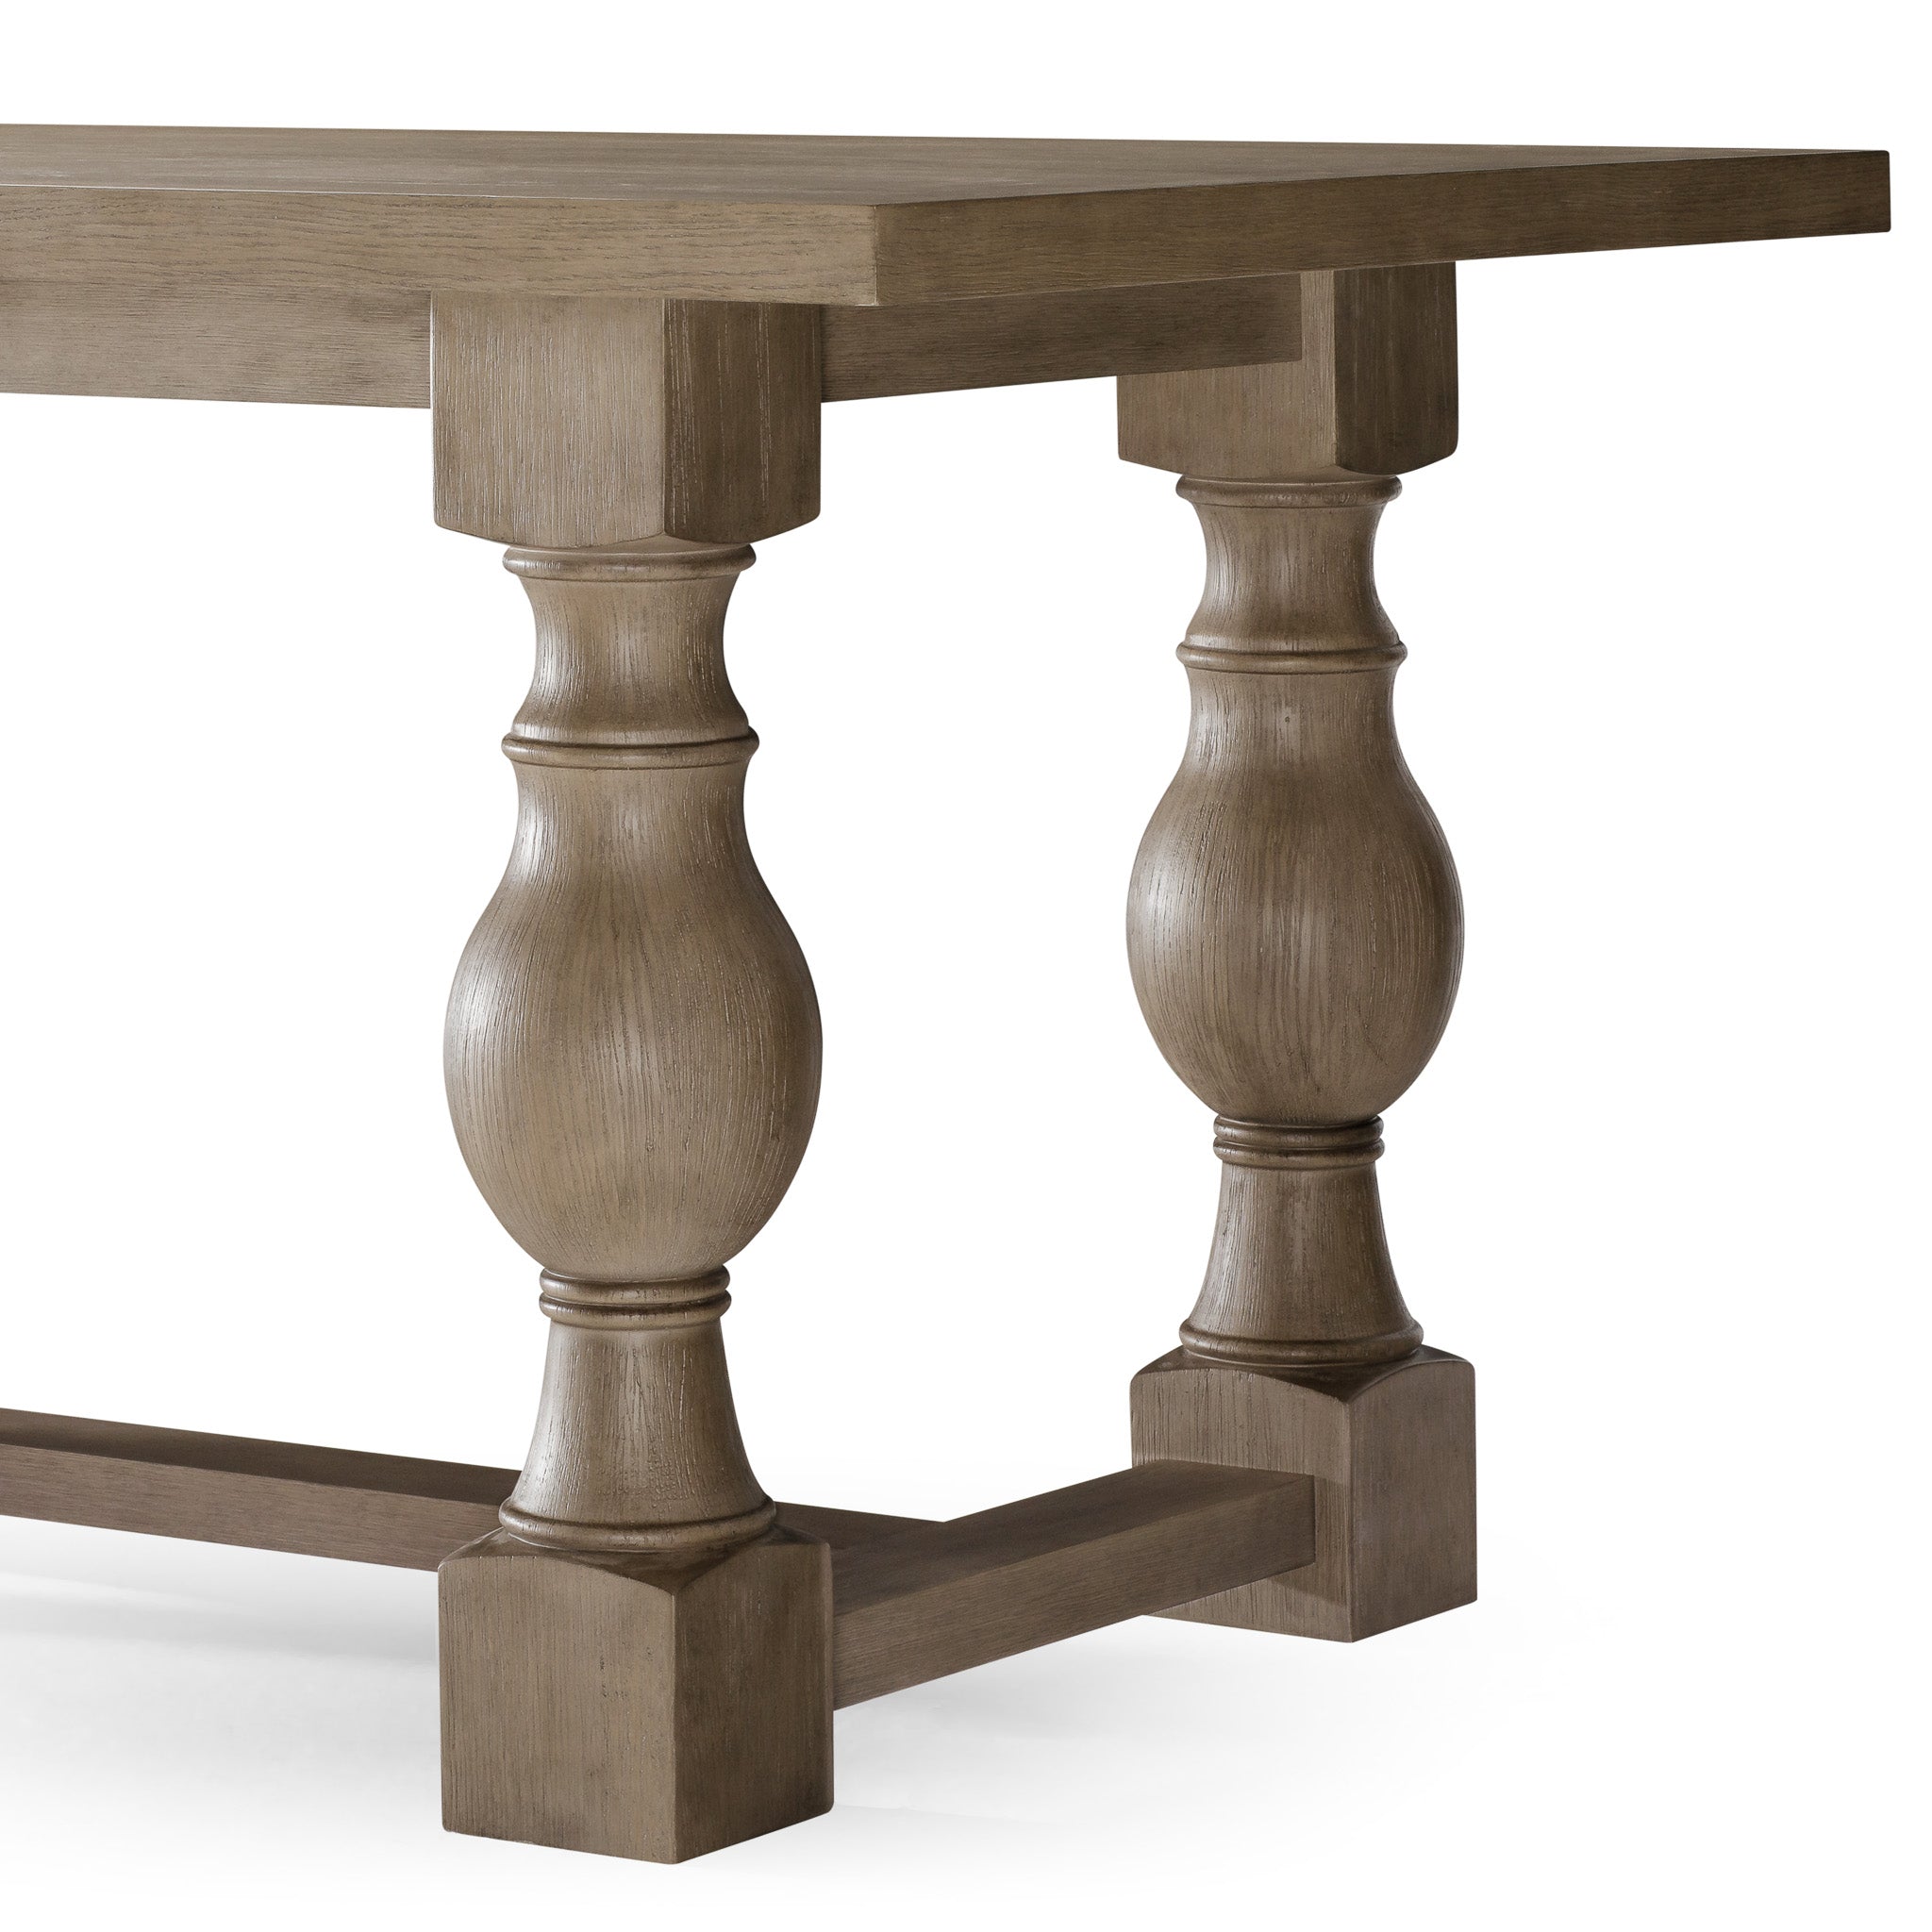 Leon Classical Wooden Dining Table in Antiqued Grey Finish in Dining Furniture by Maven Lane